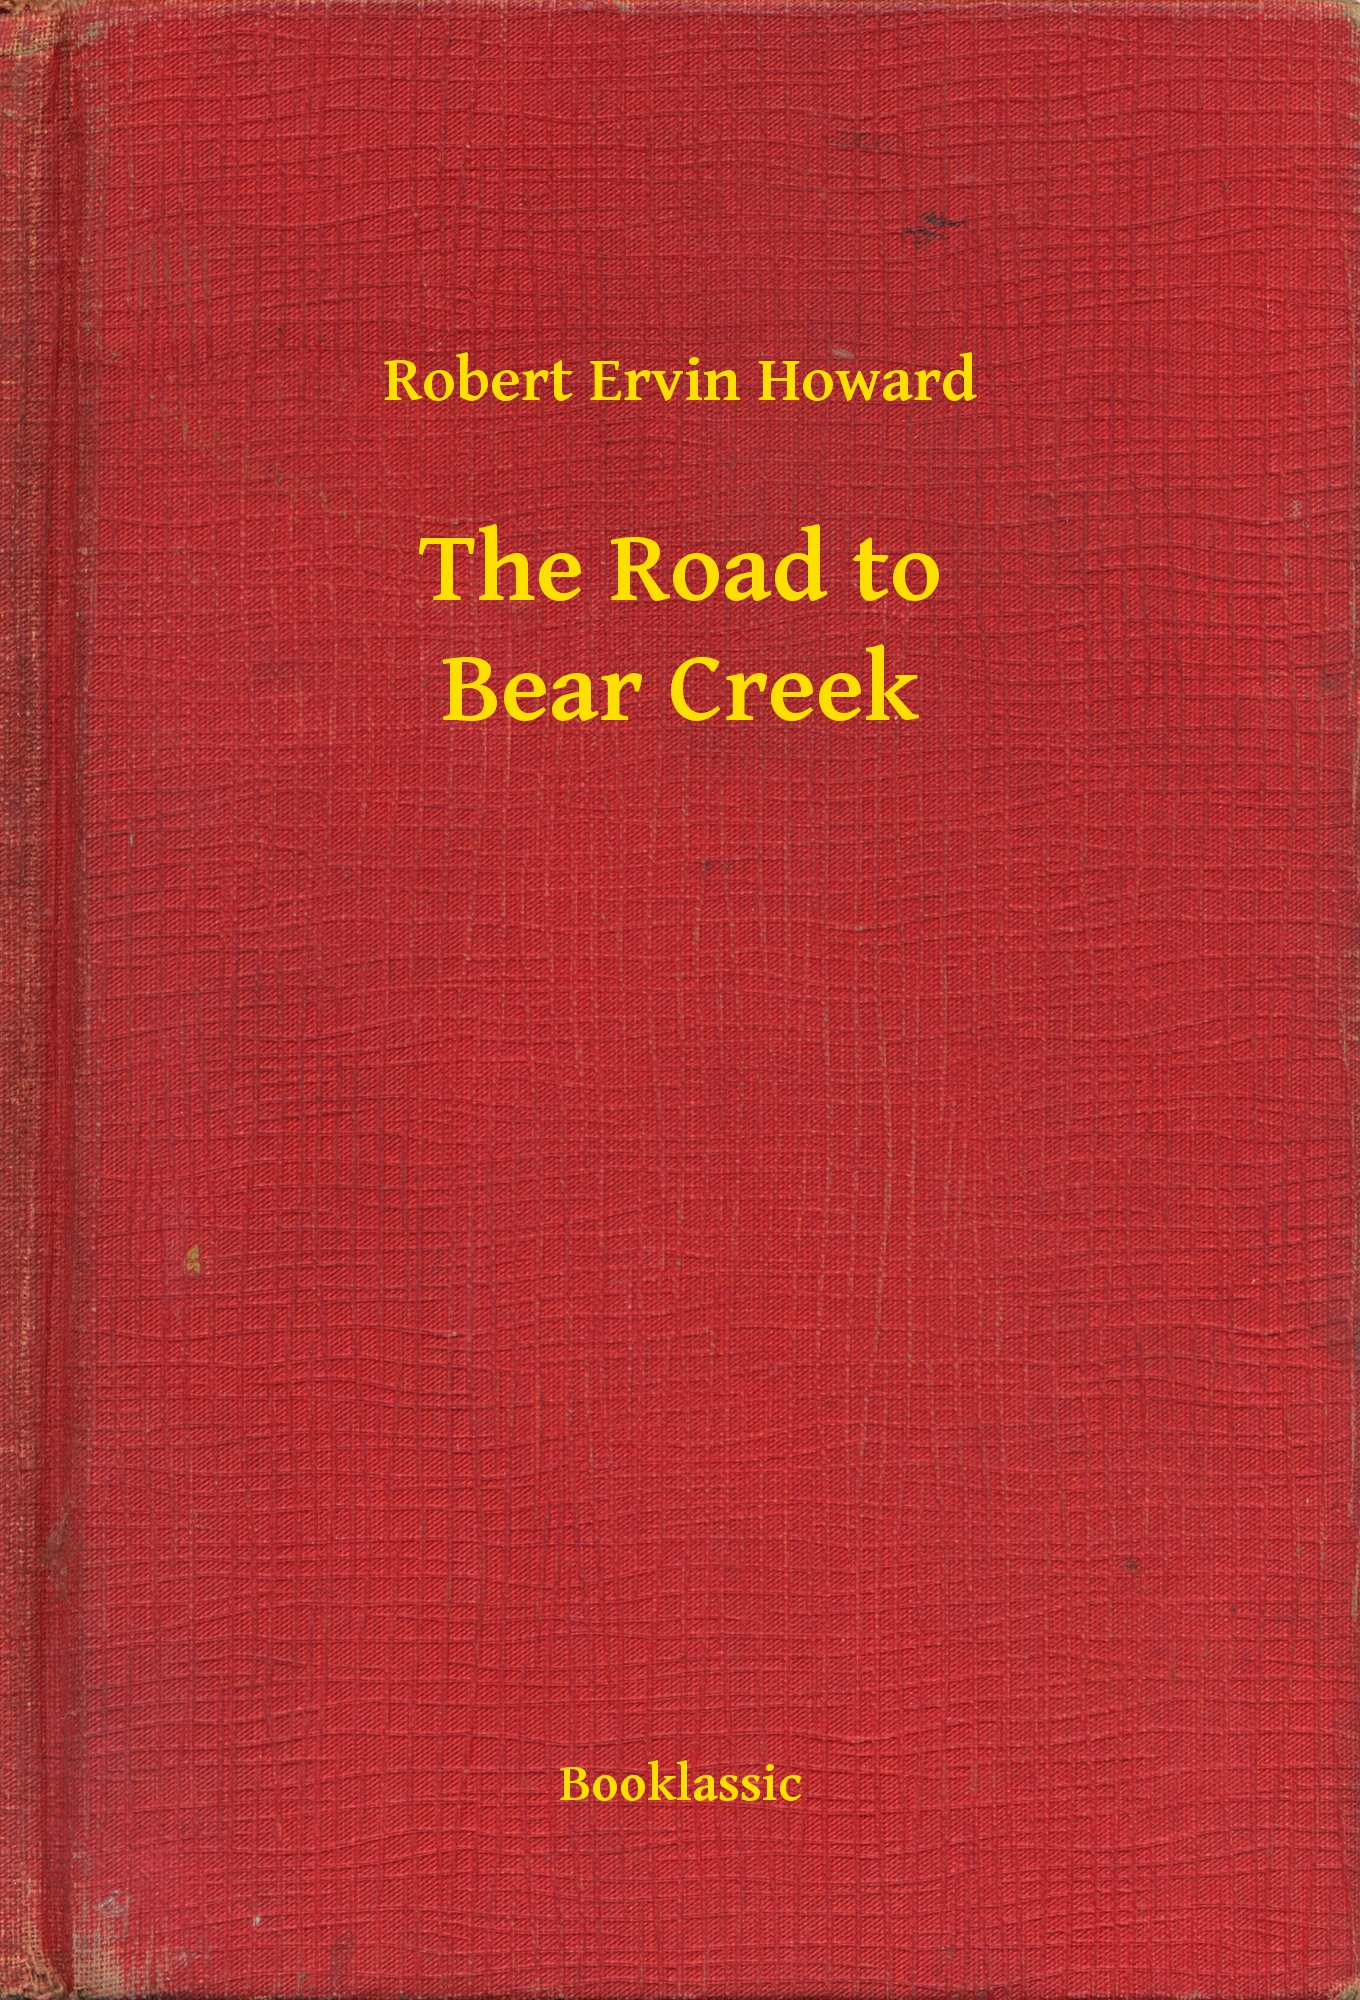 The Road to Bear Creek